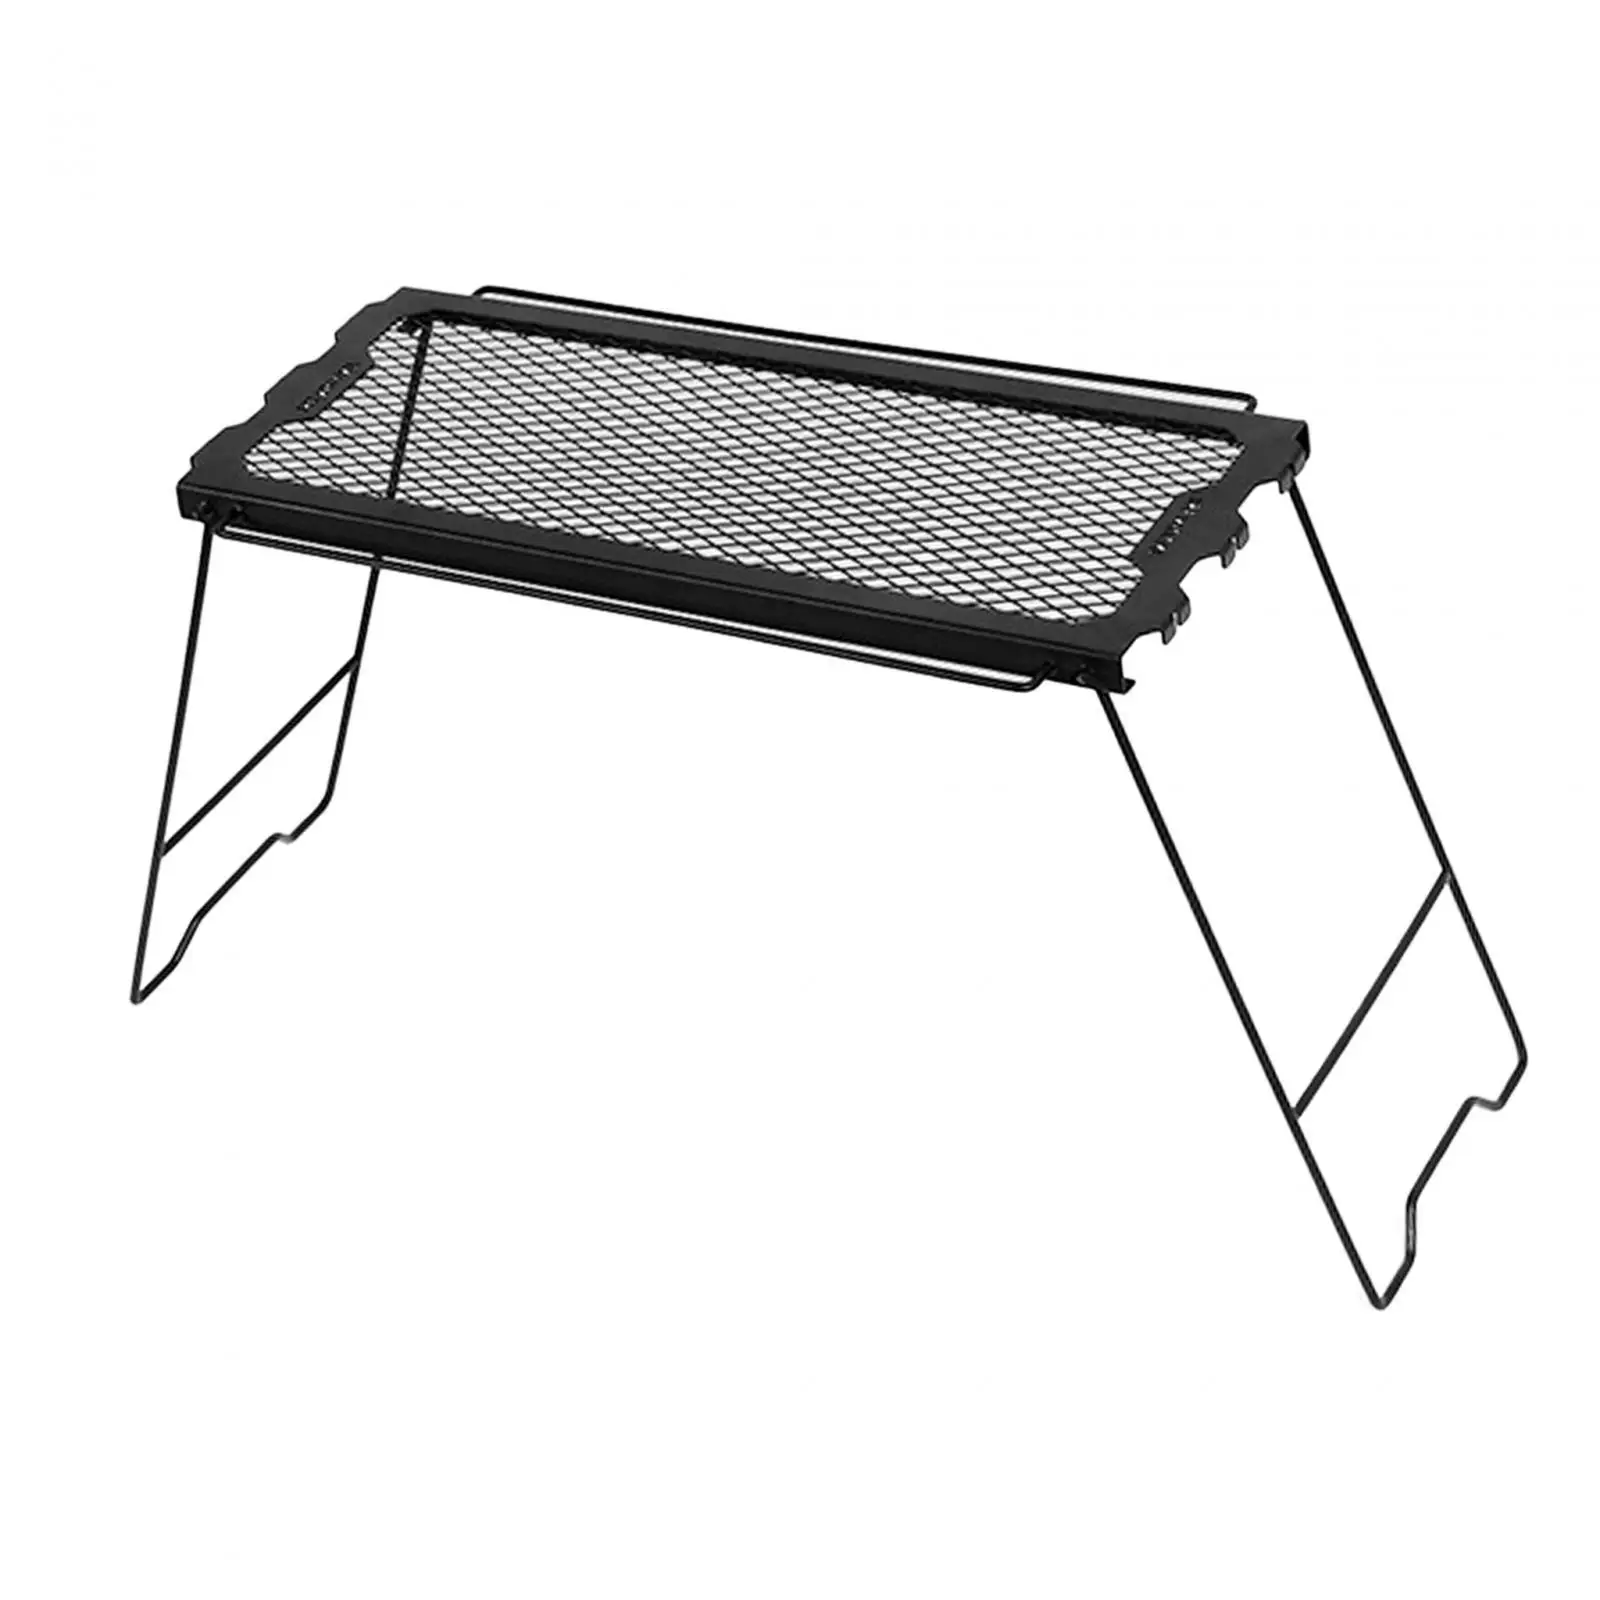 Folding Camping Table Foldable Campfire Grill with Mesh Desktop Camping Cooking Grate over Fire for Indoor Patio Hiking Black